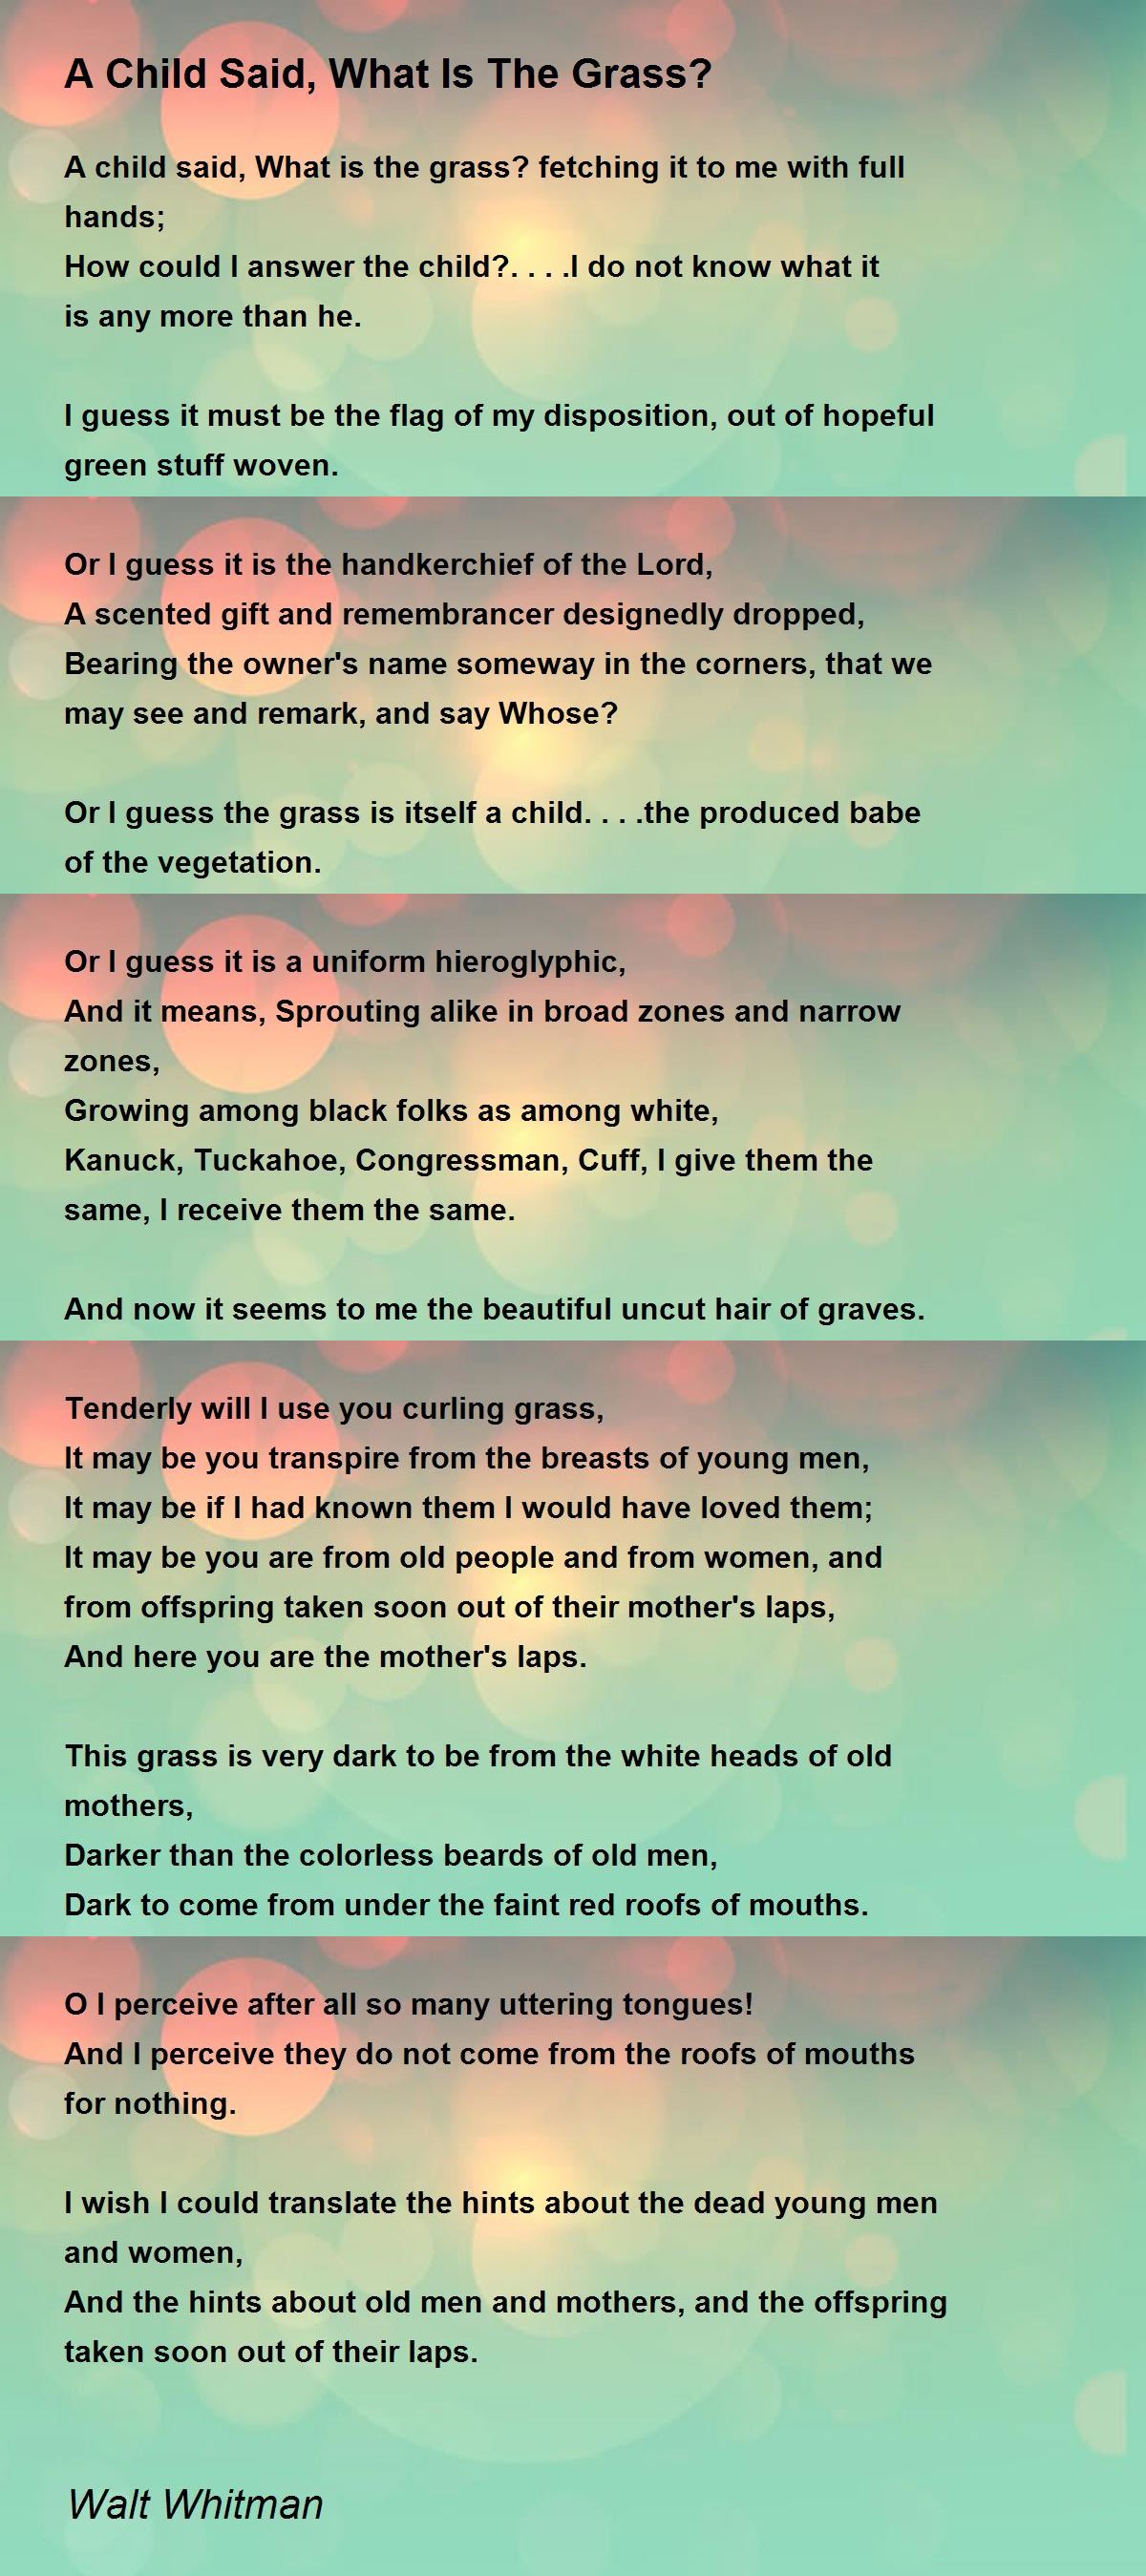 A Child Said, What Is The Grass? Poem by Walt Whitman - Poem Hunter